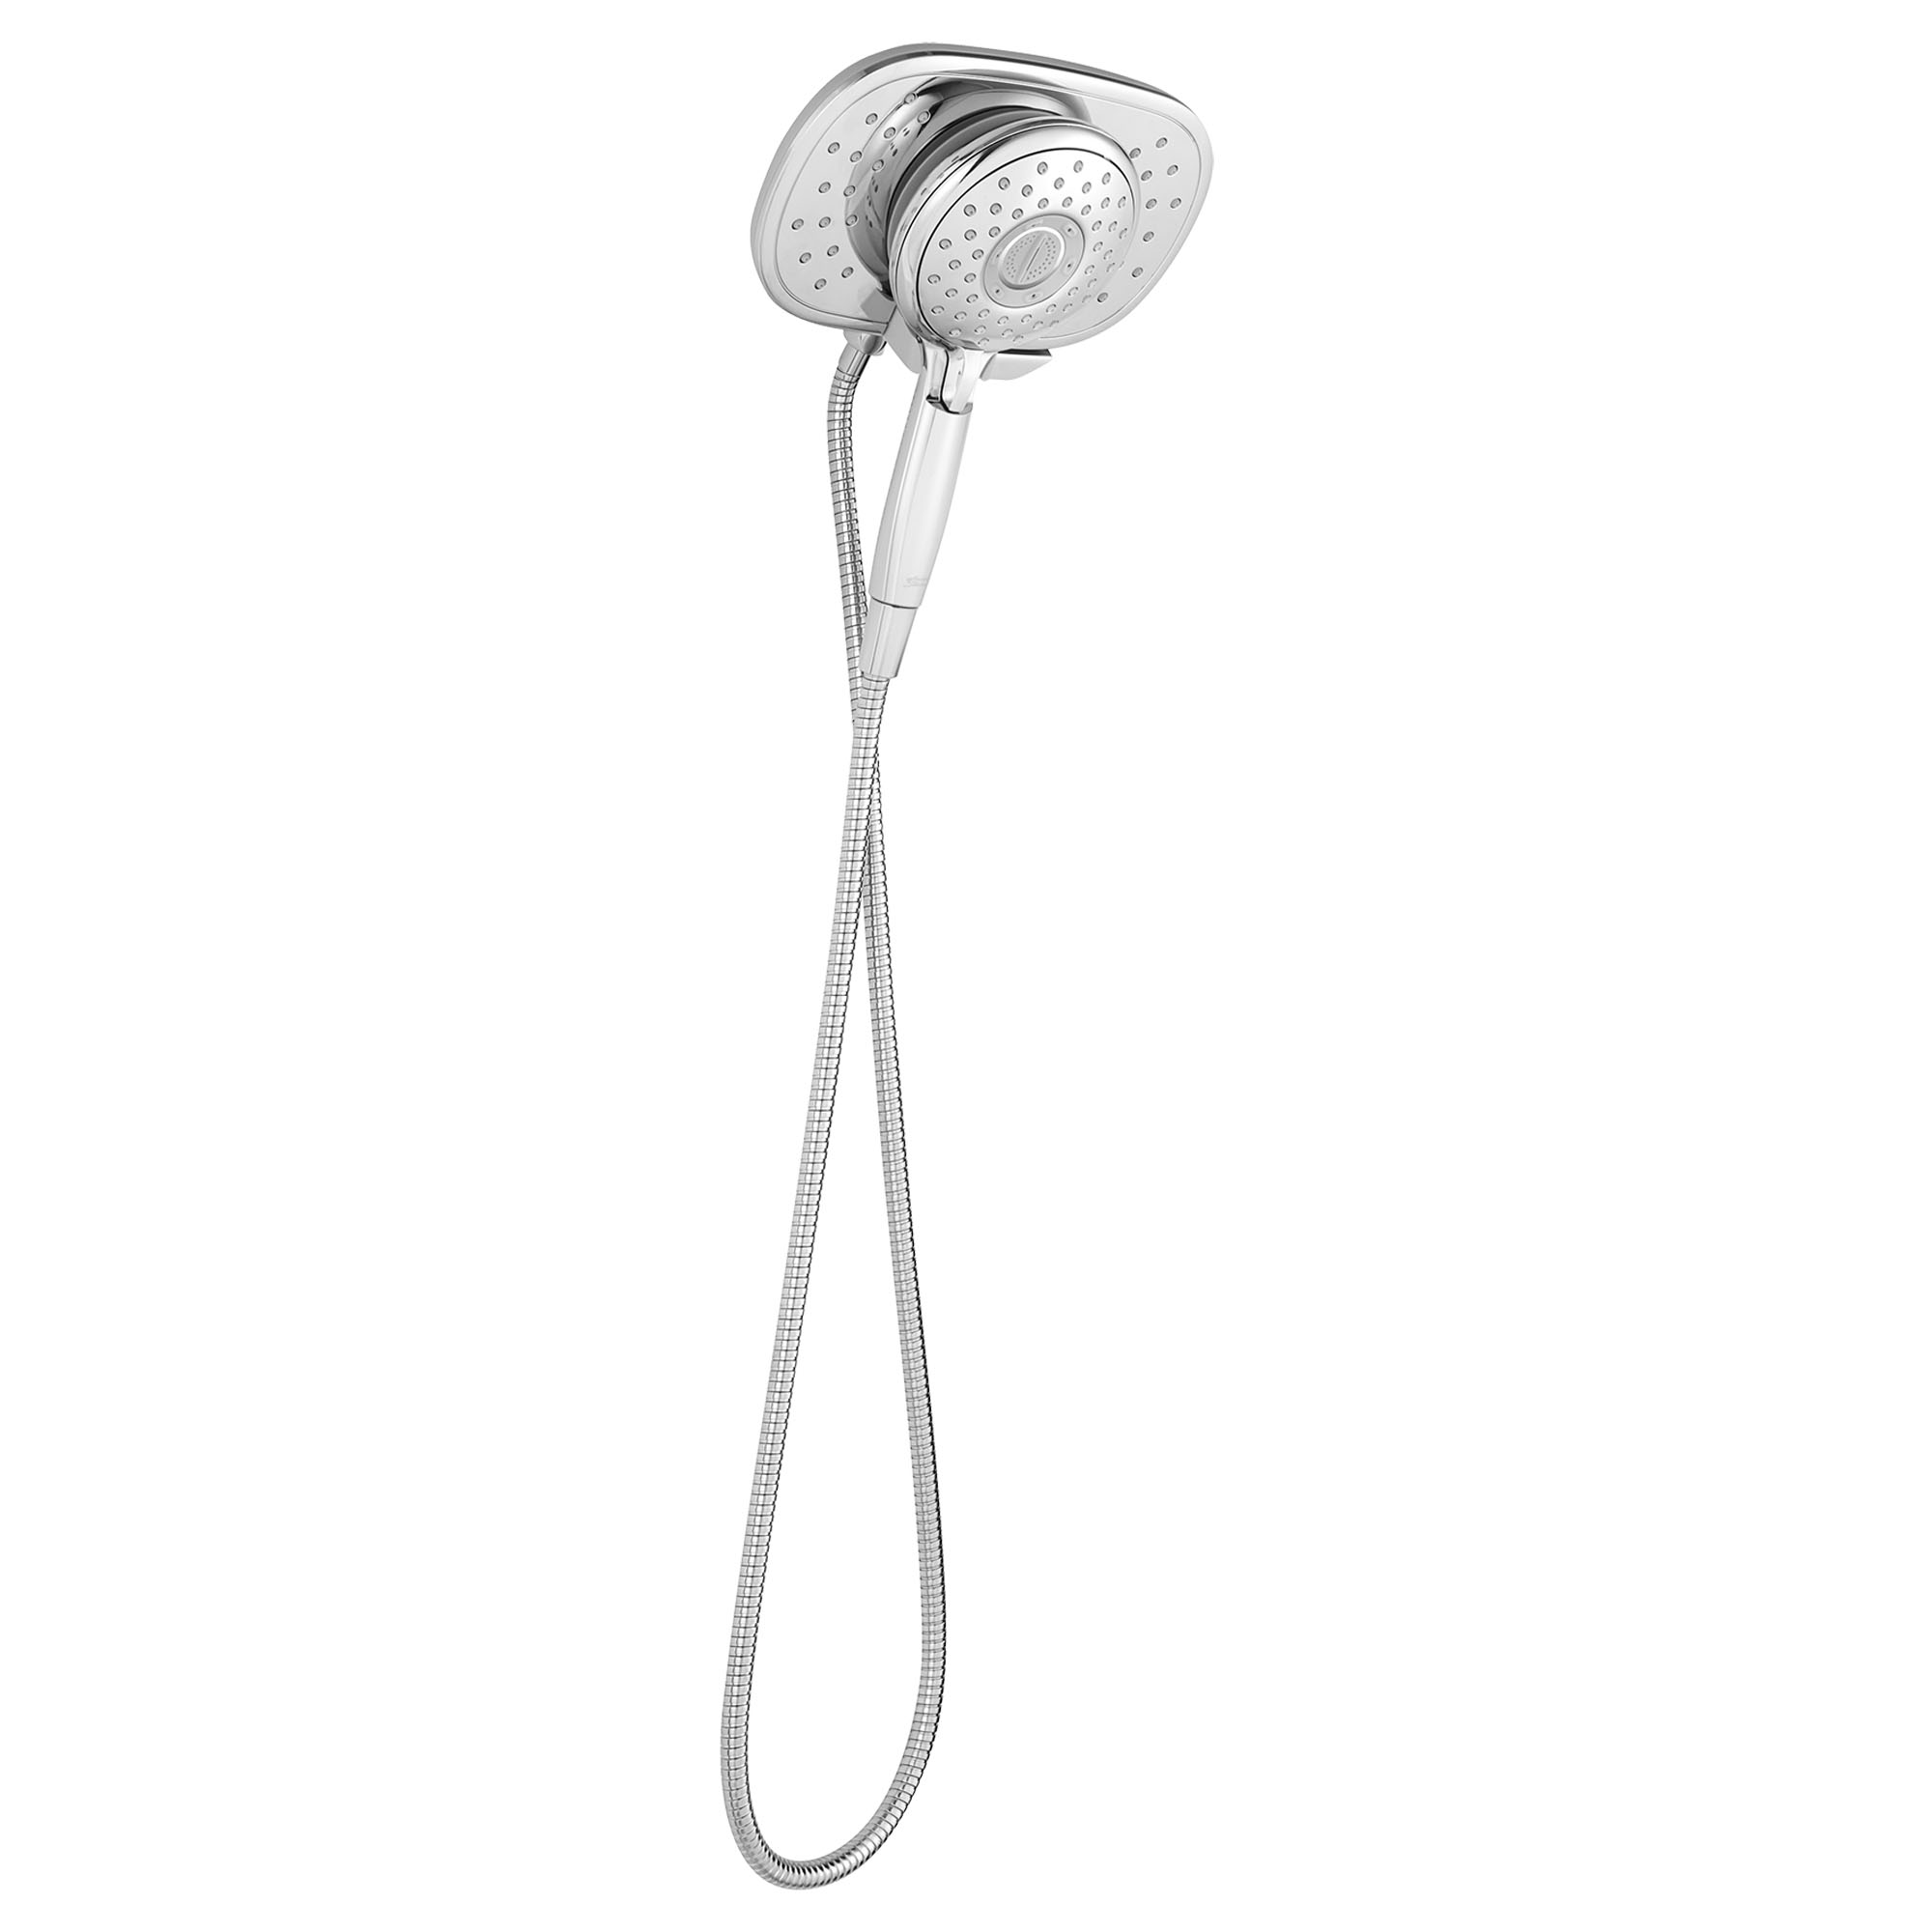 Spectra Duo 1.8 GPM 4-Function 2-in-1 Shower Head